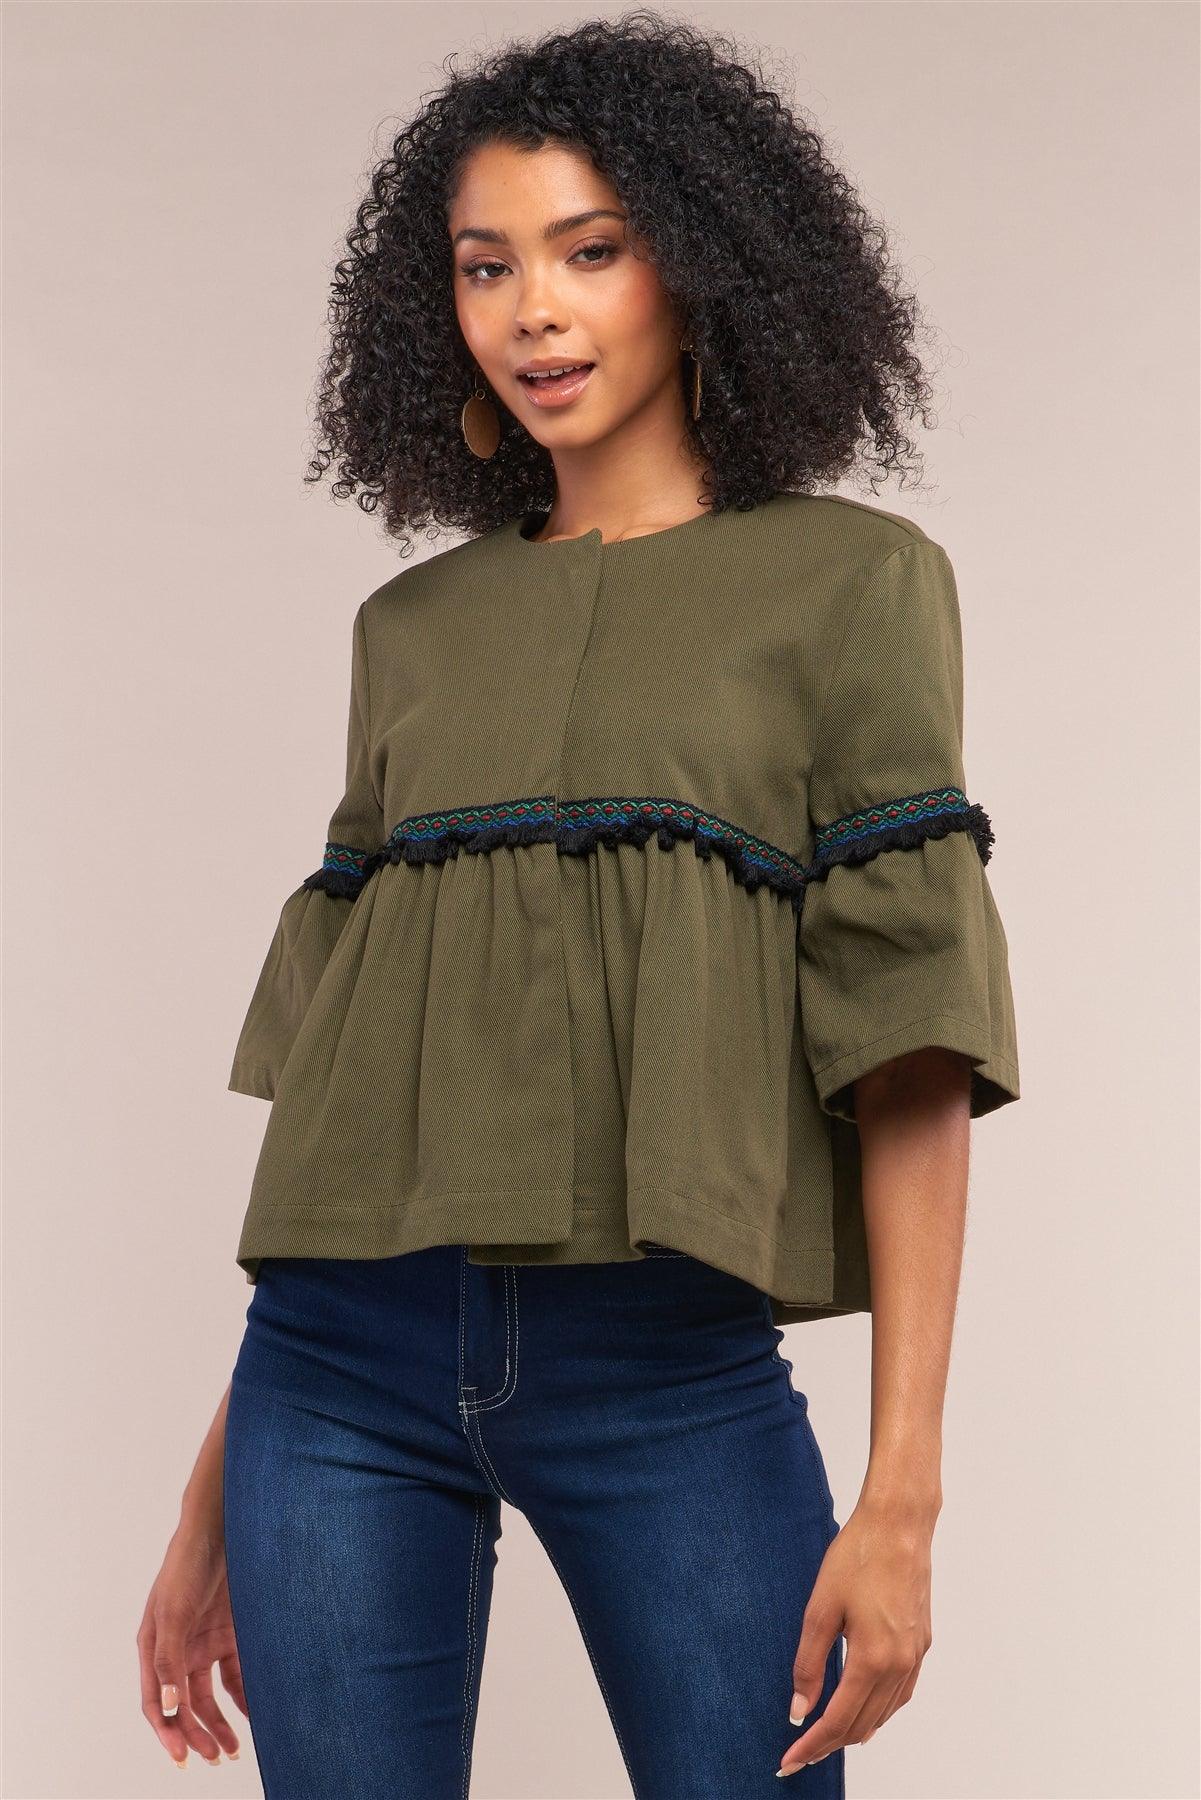 Olive Multicolor Embroidery Shredded Trim Detail Midi Bell Sleeve Crew Neck Flare Cropped Jacket /1-2-2-1